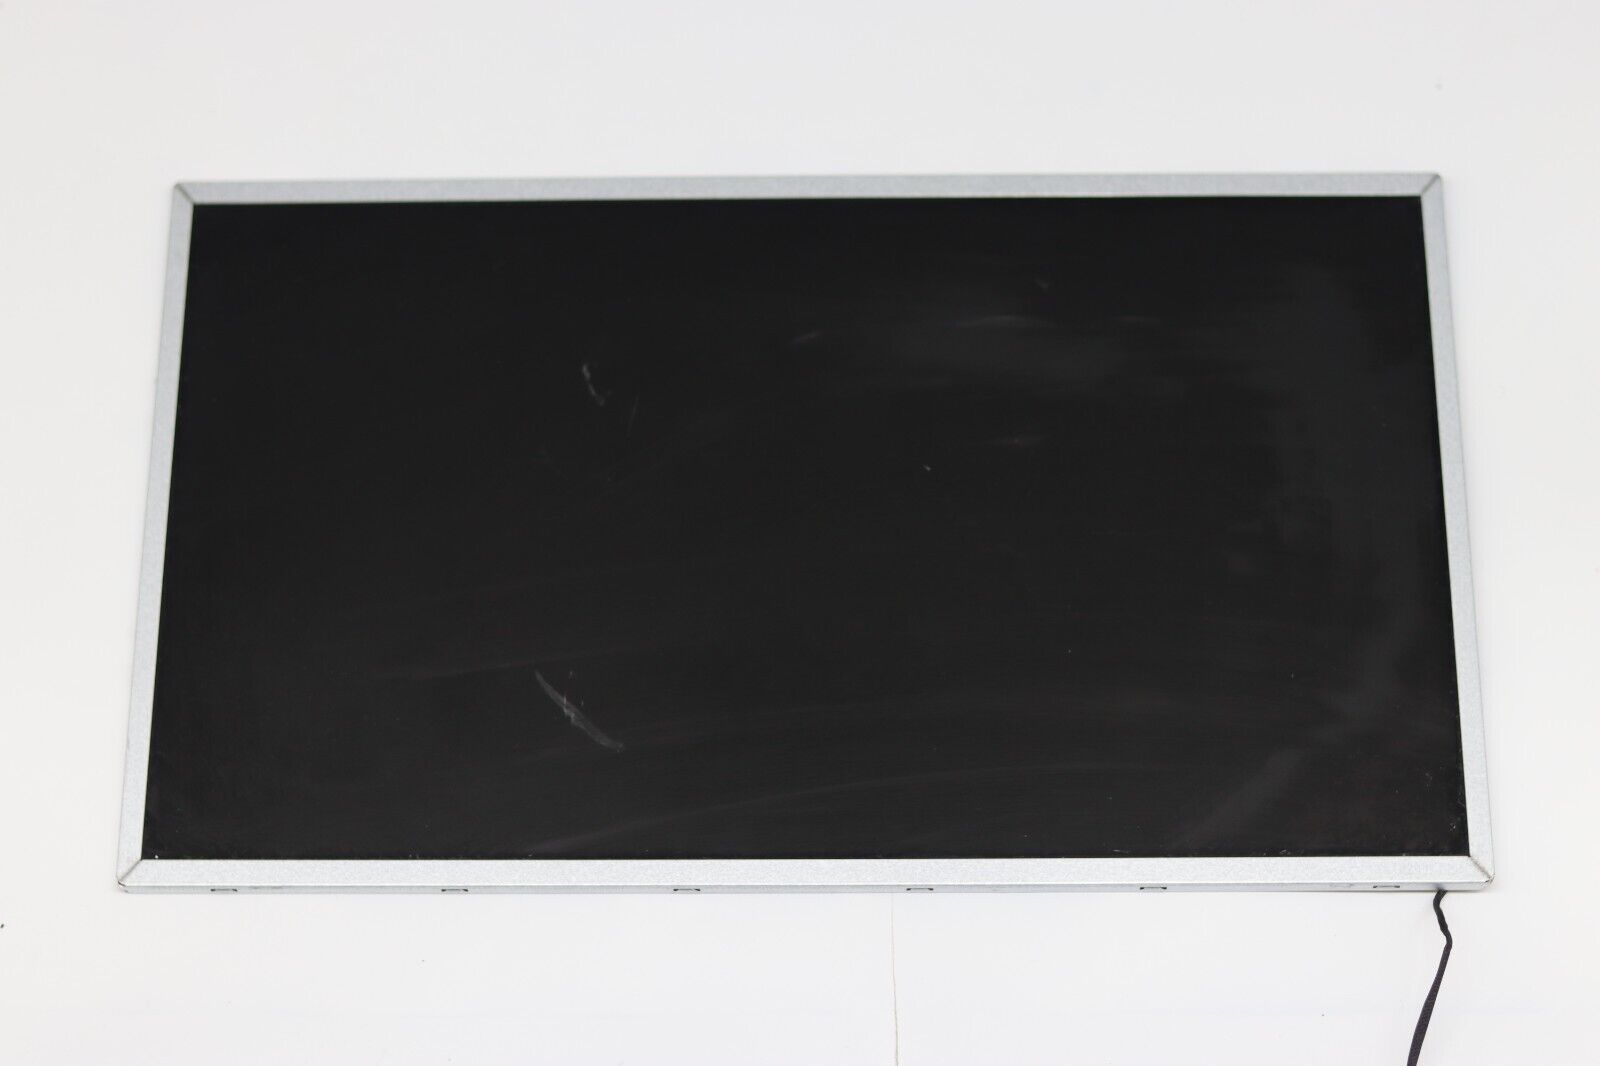 Genuine Samsung LTM200KT10 AIO ALL IN ONE LCD Panel 20